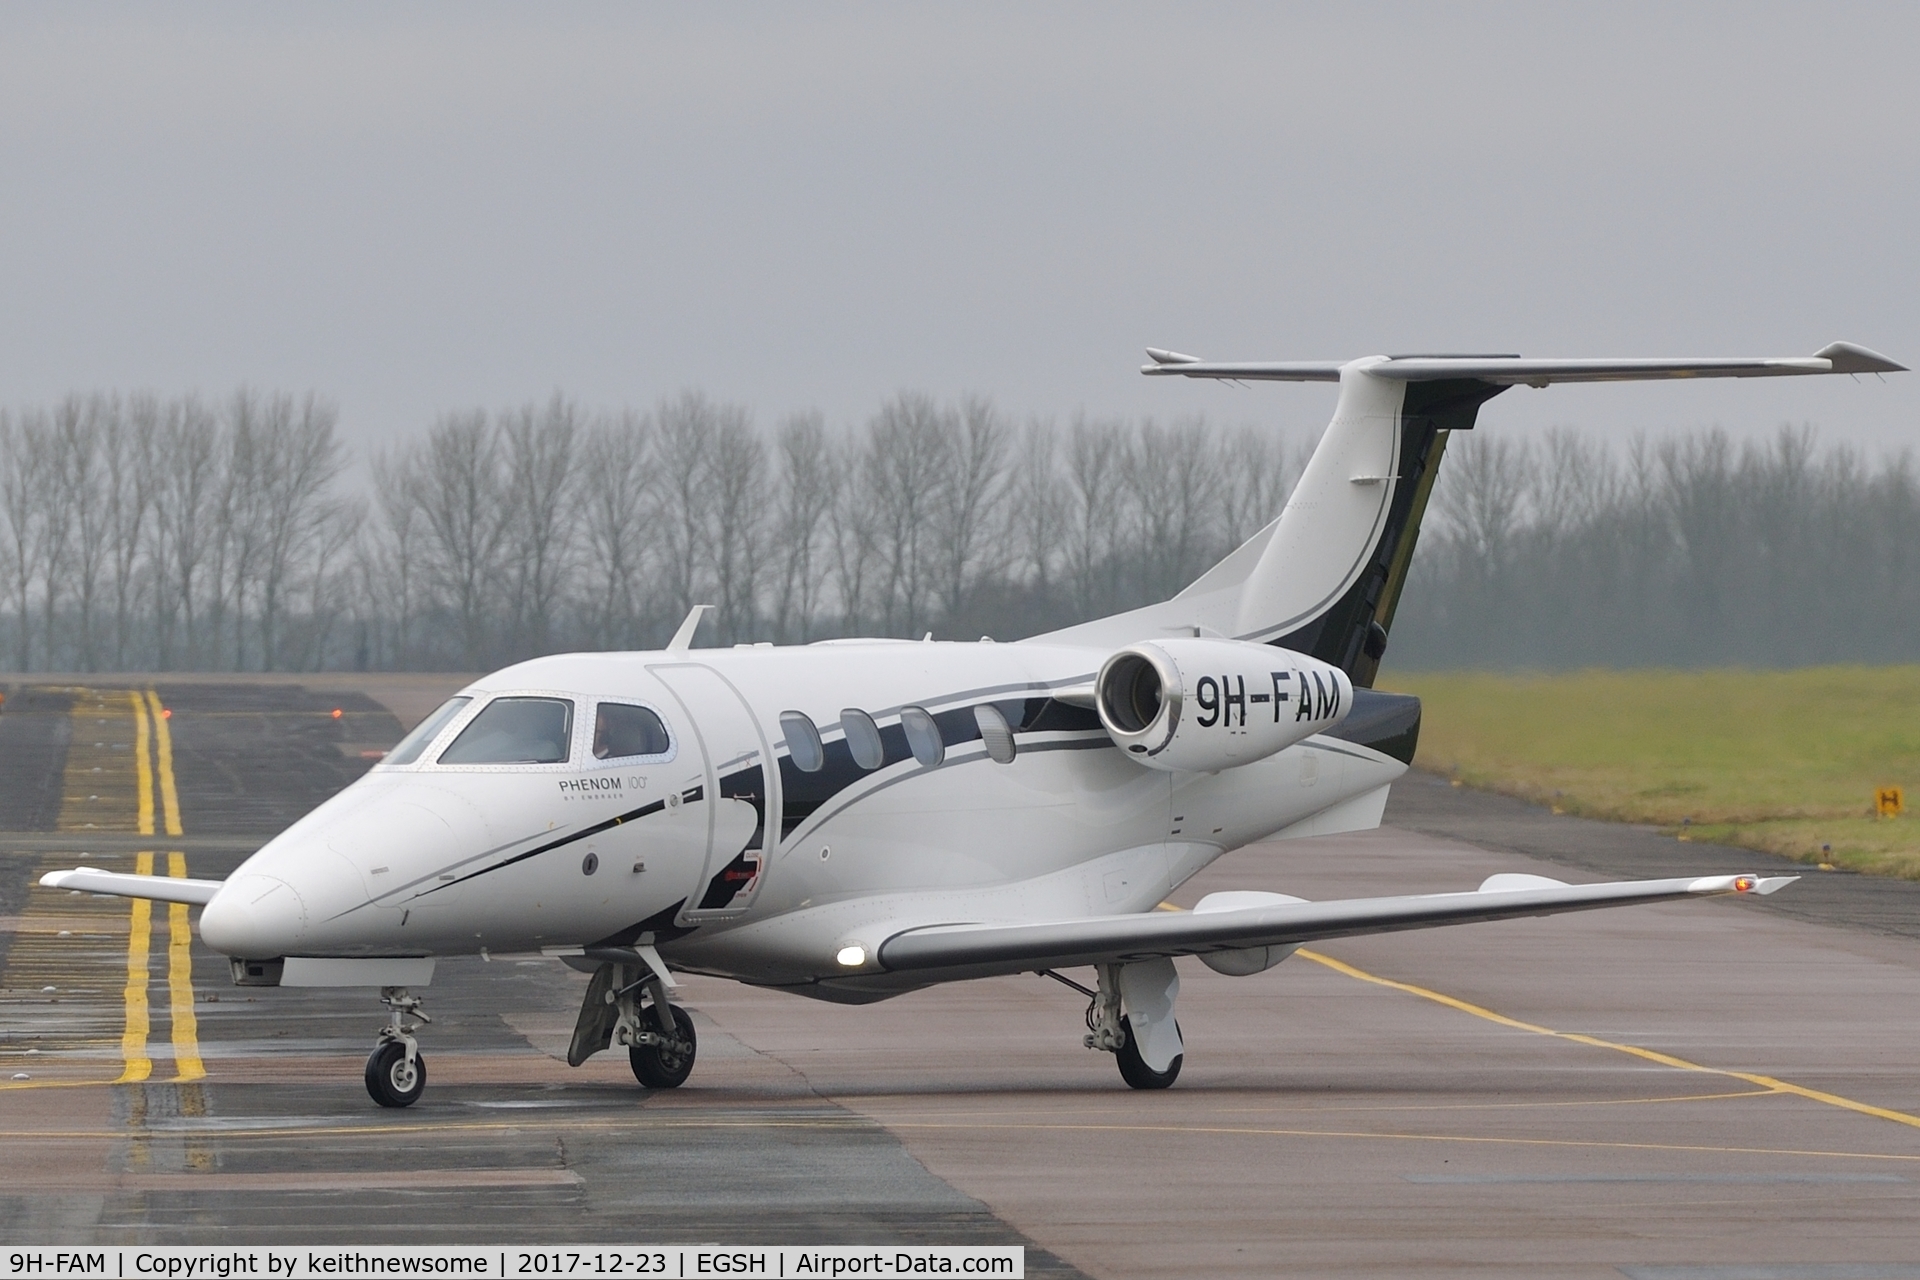 9H-FAM, 2009 Embraer EMB-500 Phenom 100 C/N 50000100, Arriving at Norwich from Nice.